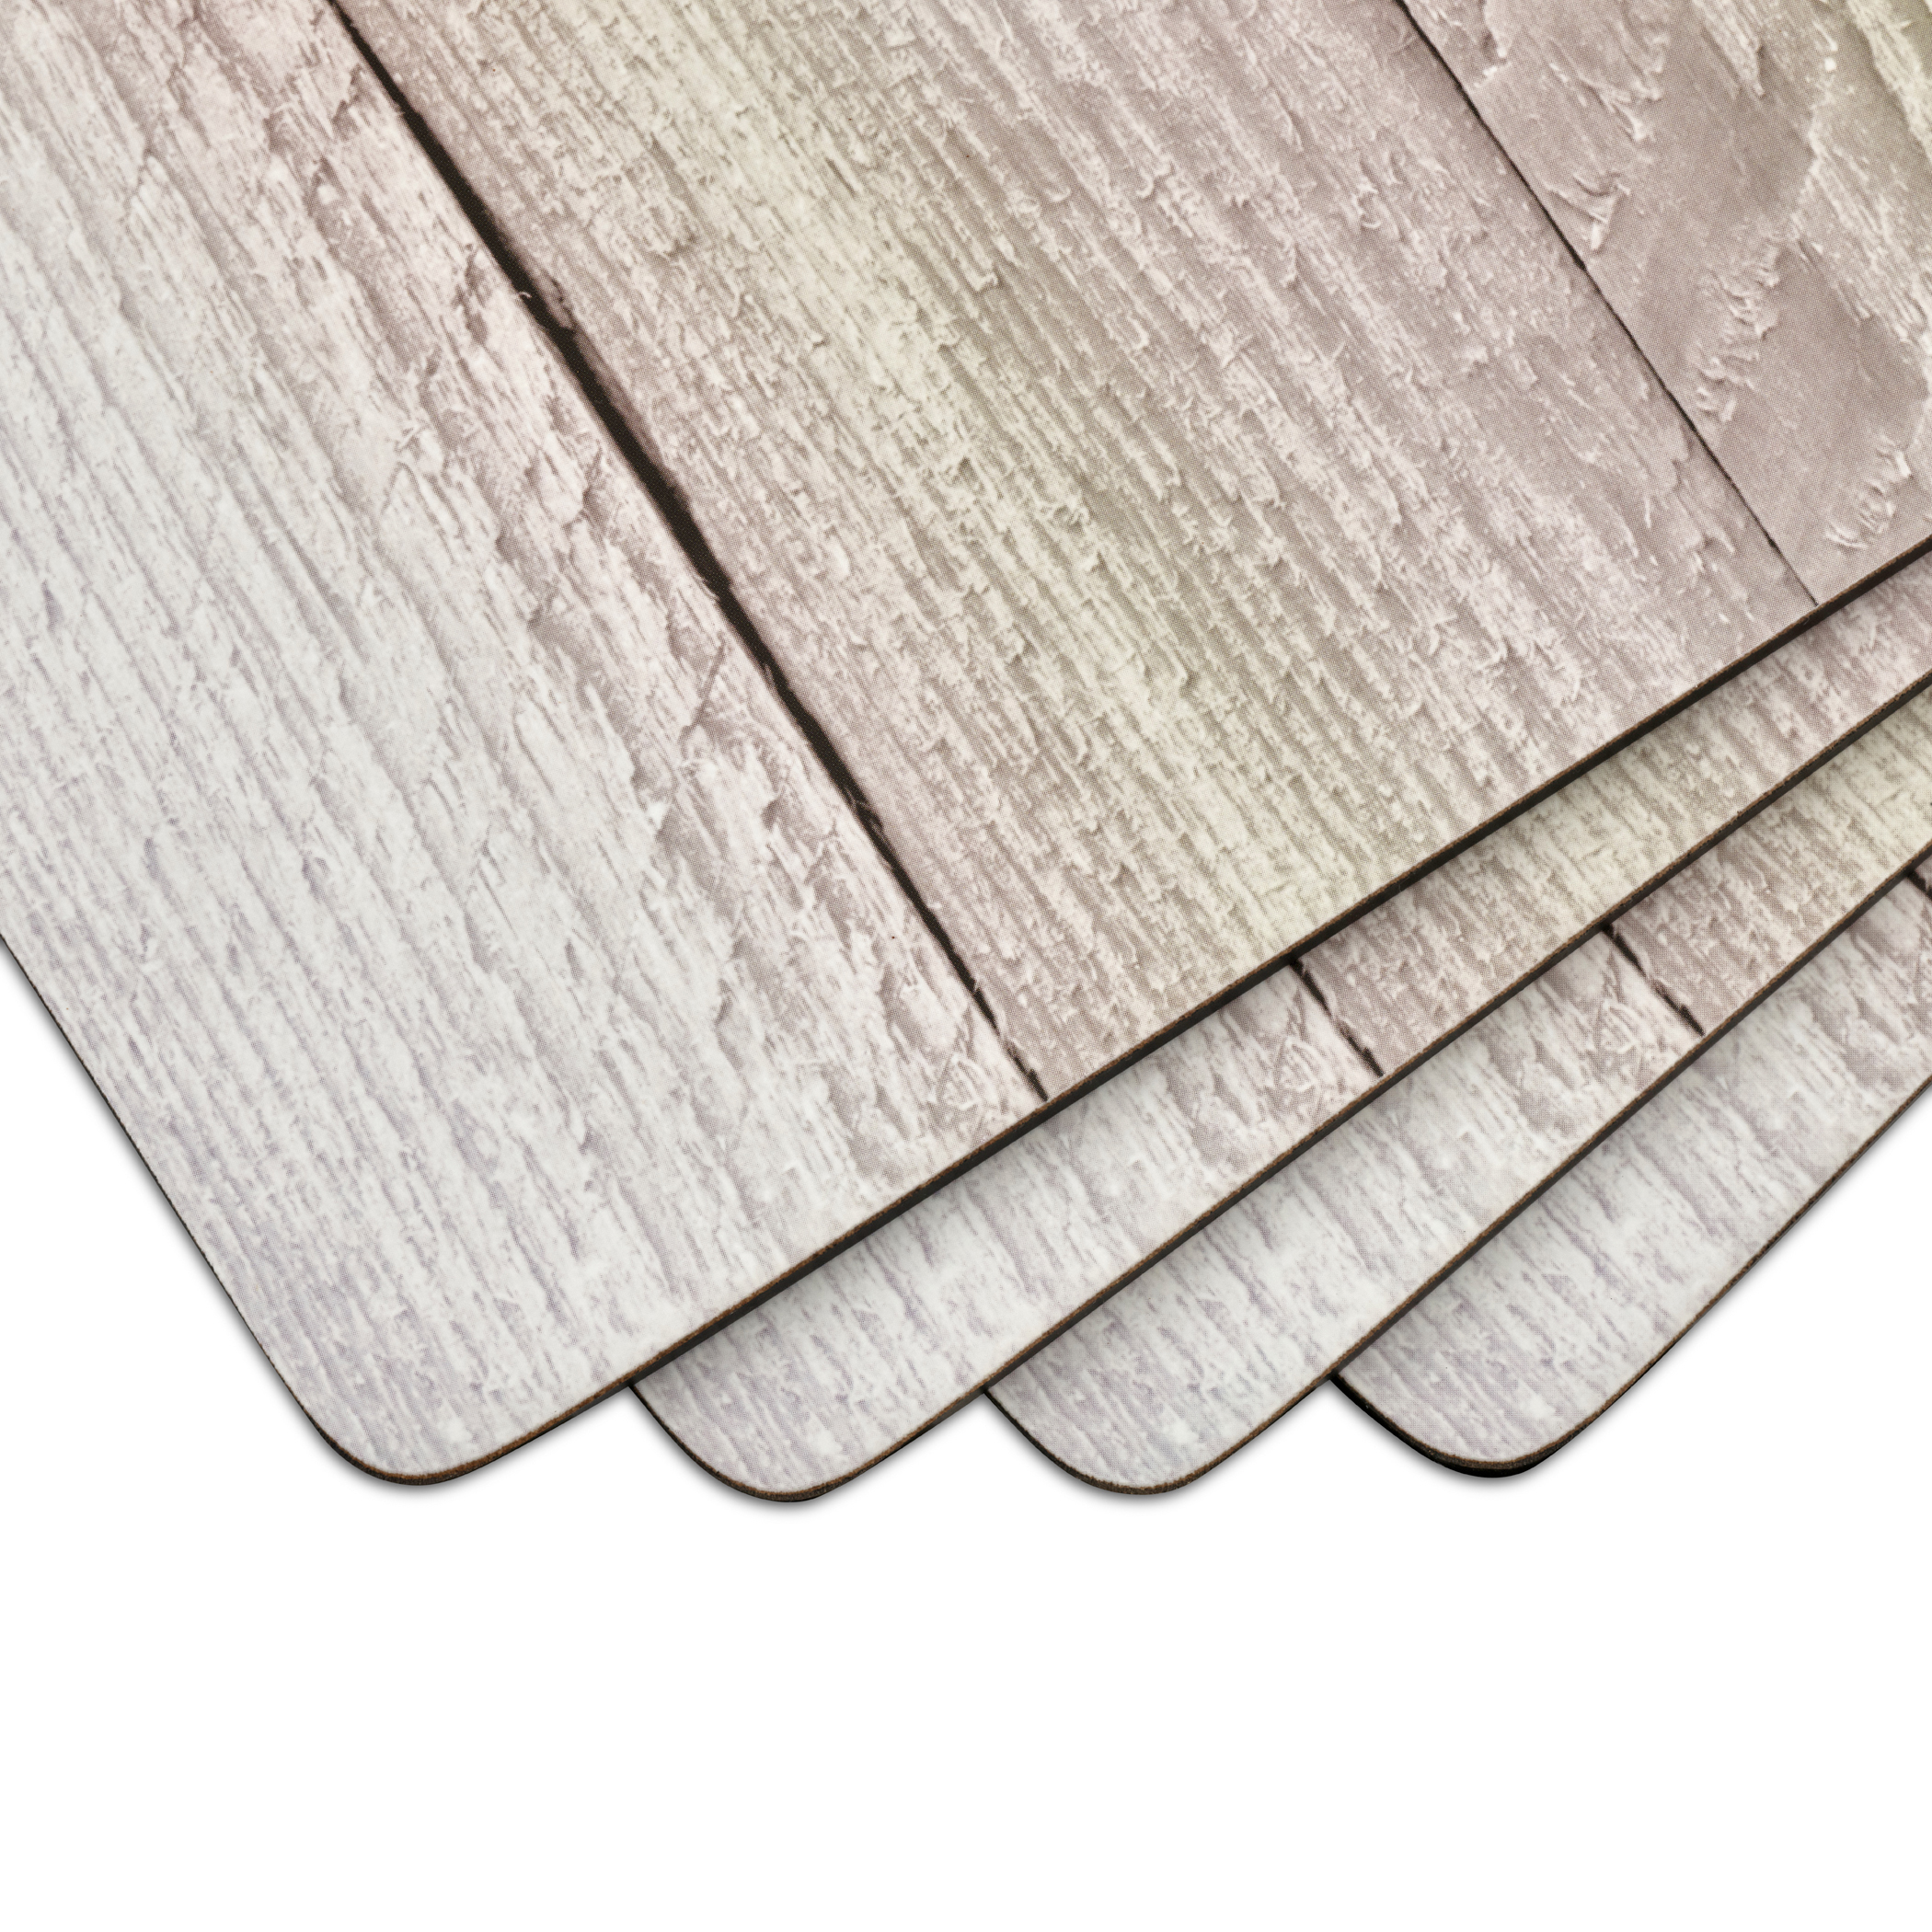 Pimpernel Driftwood Placemats Set of 4 image number null